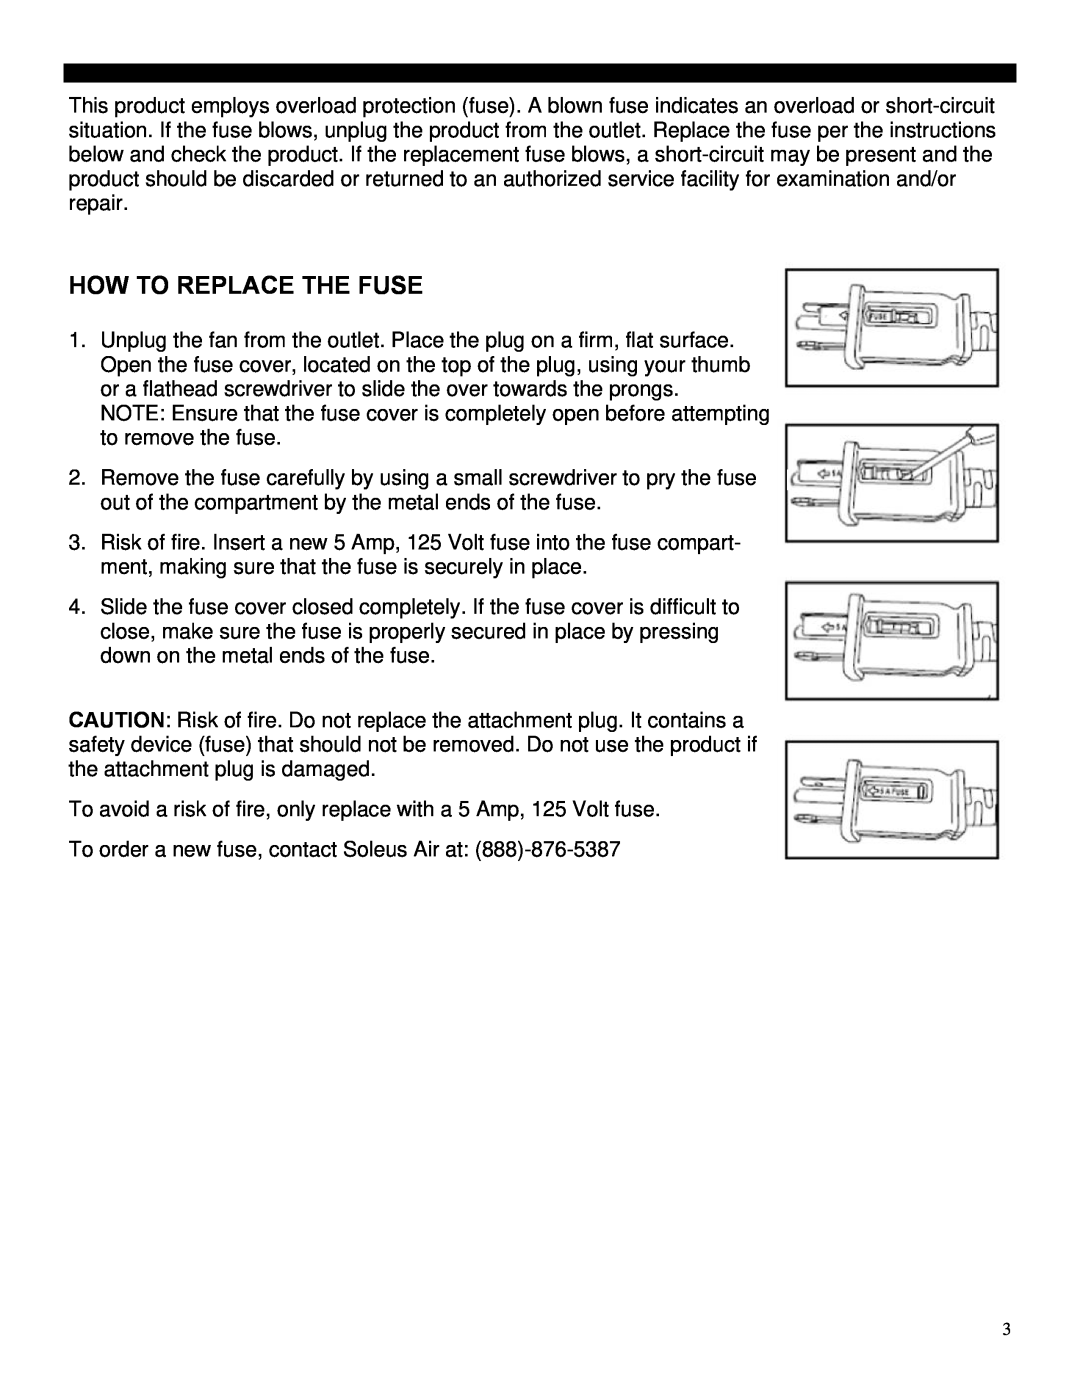 Soleus Air FT1-30-41 operating instructions How To Replace The Fuse 